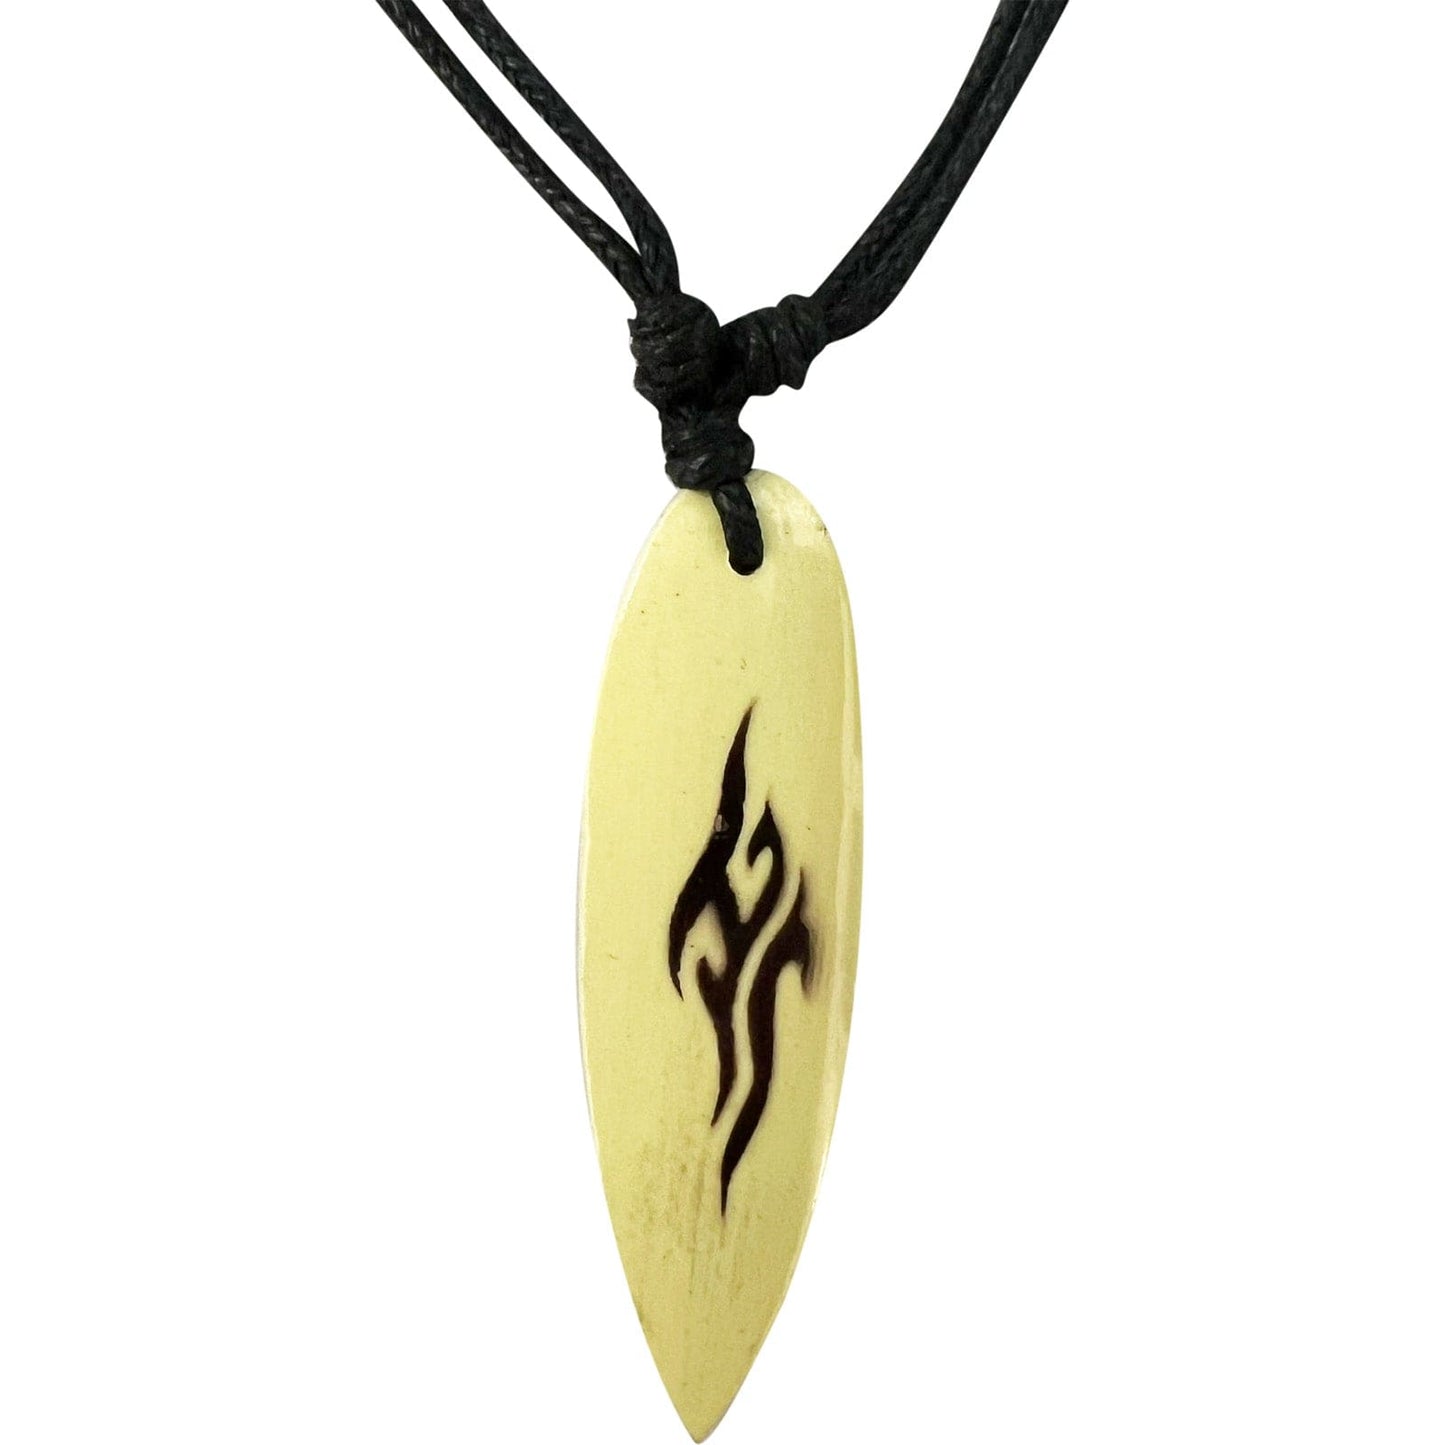 Wooden Surfboard Pendant Necklace Black Cord Chain Mens Womens Surfing Jewellery